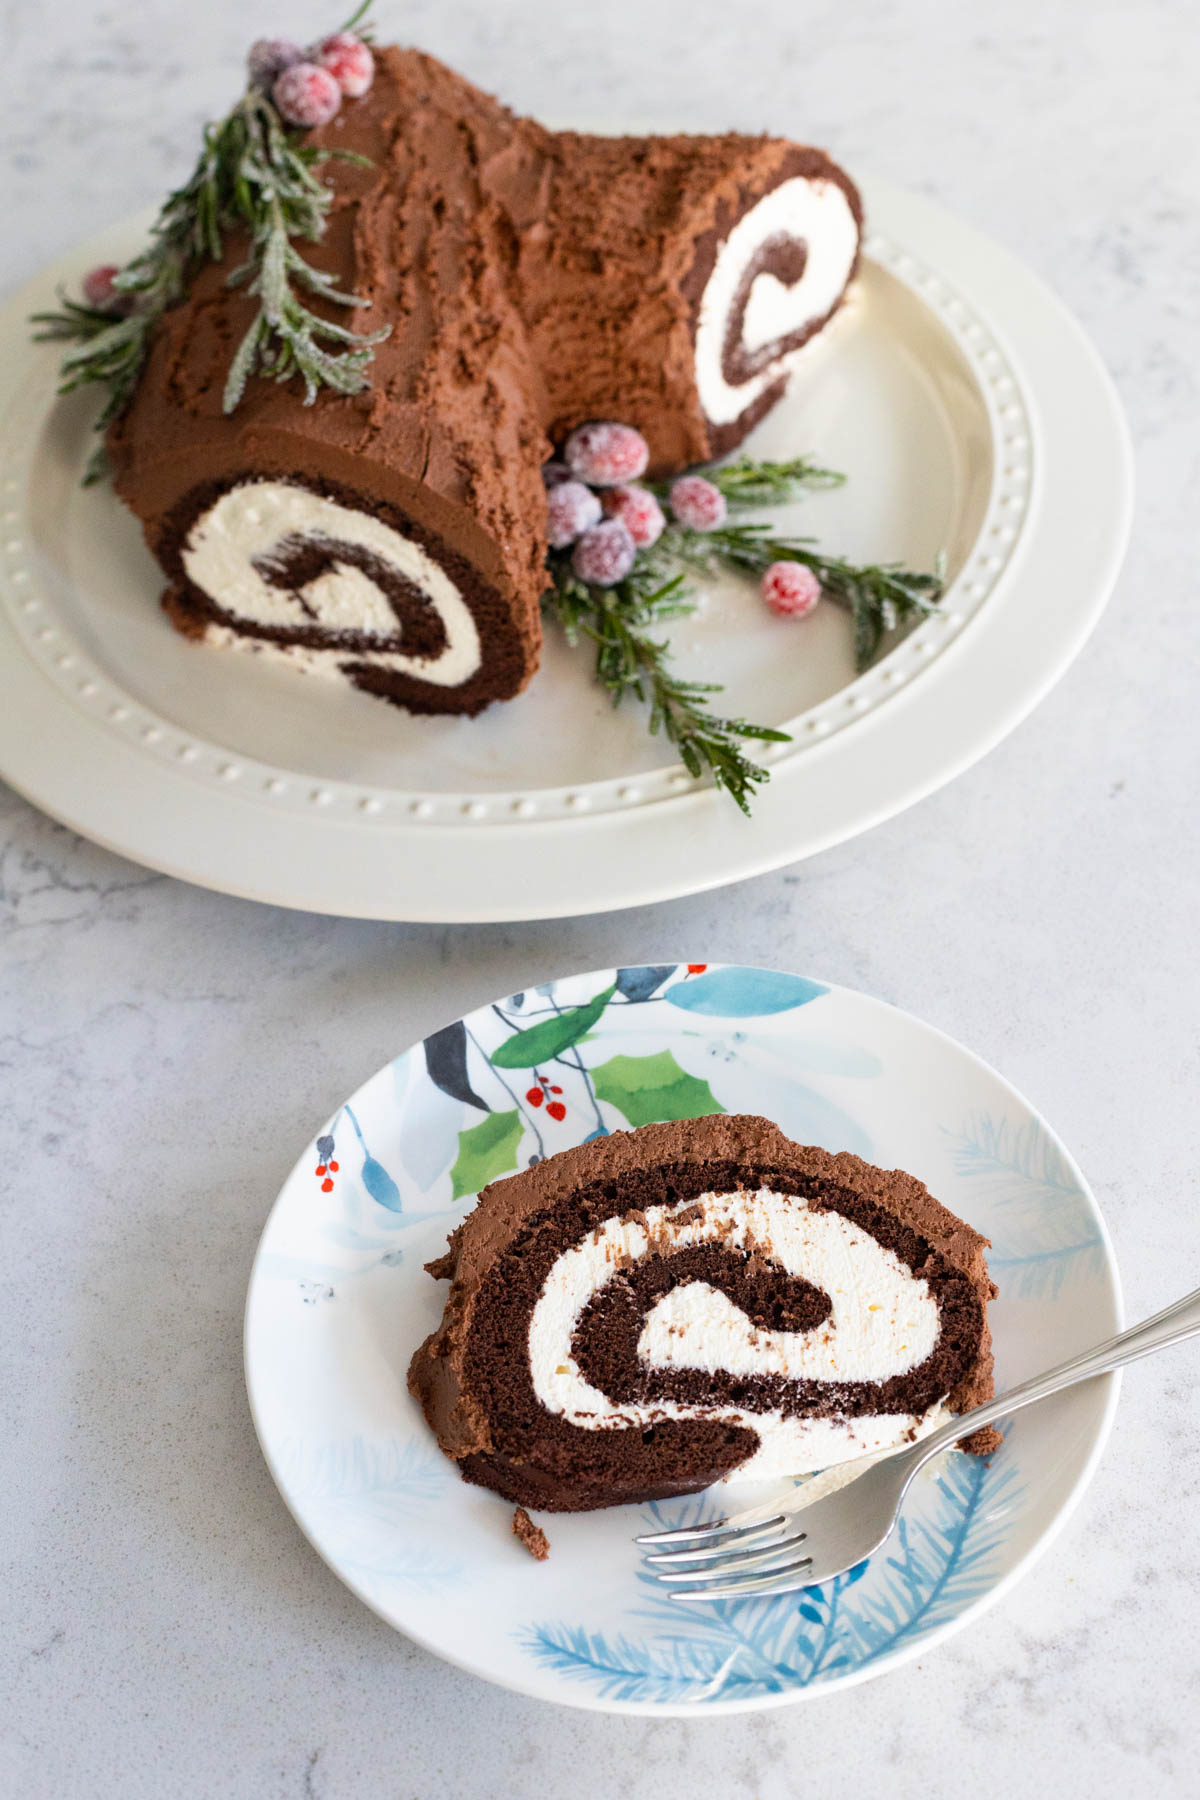 The sliced yule log cake is on a Christmas plate with a fork. The whole yule log cake is on the platter in the background.